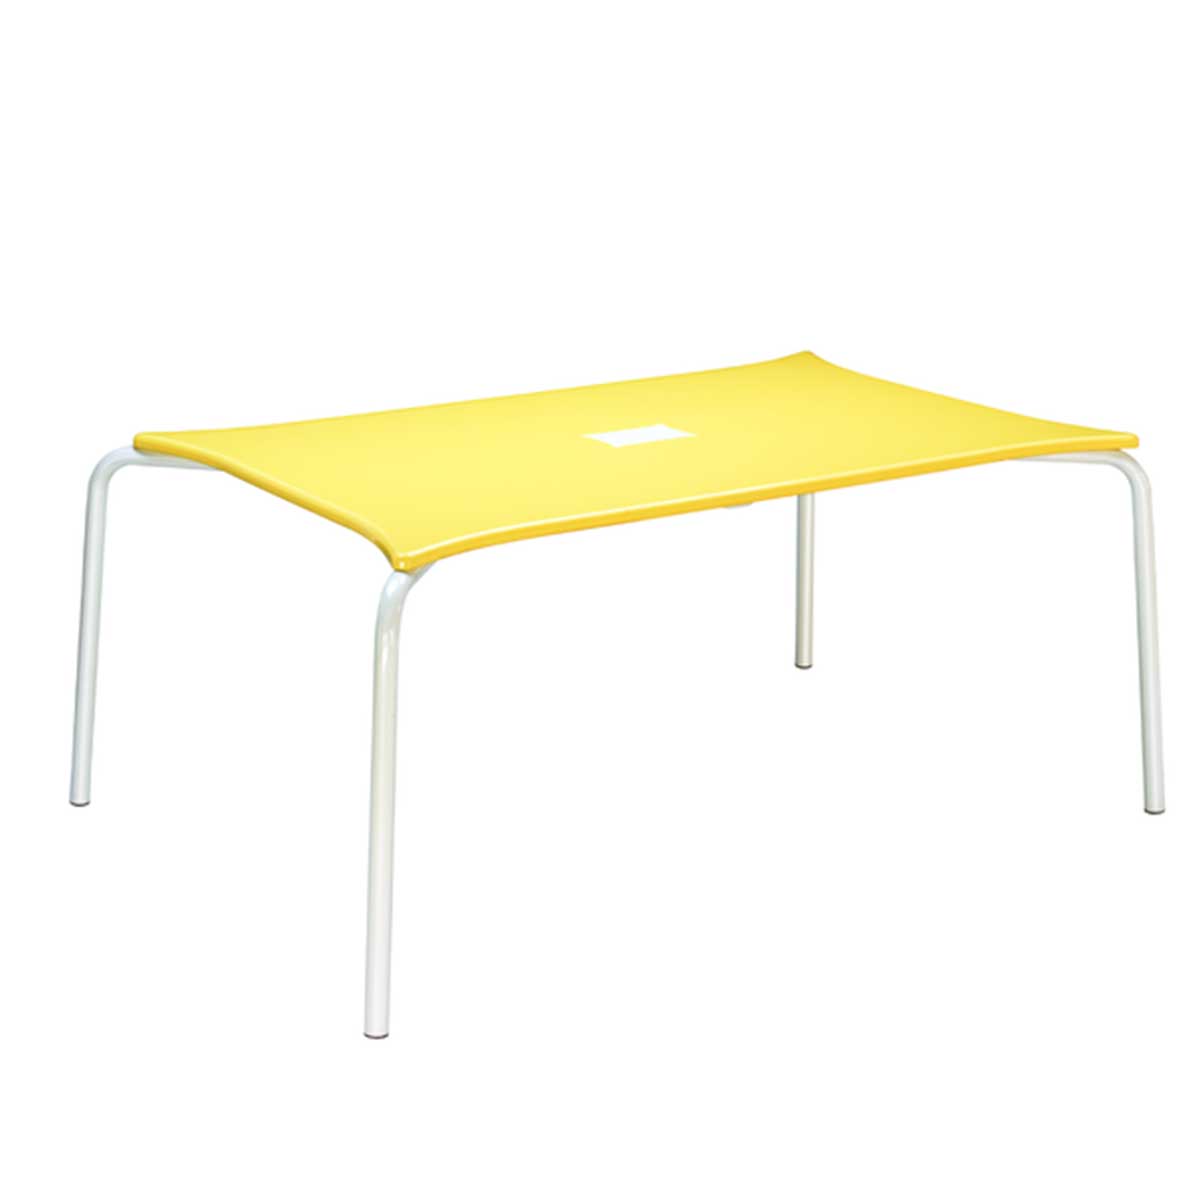 Cafeteria Table Manufacturers, Suppliers in Noida Sector 56